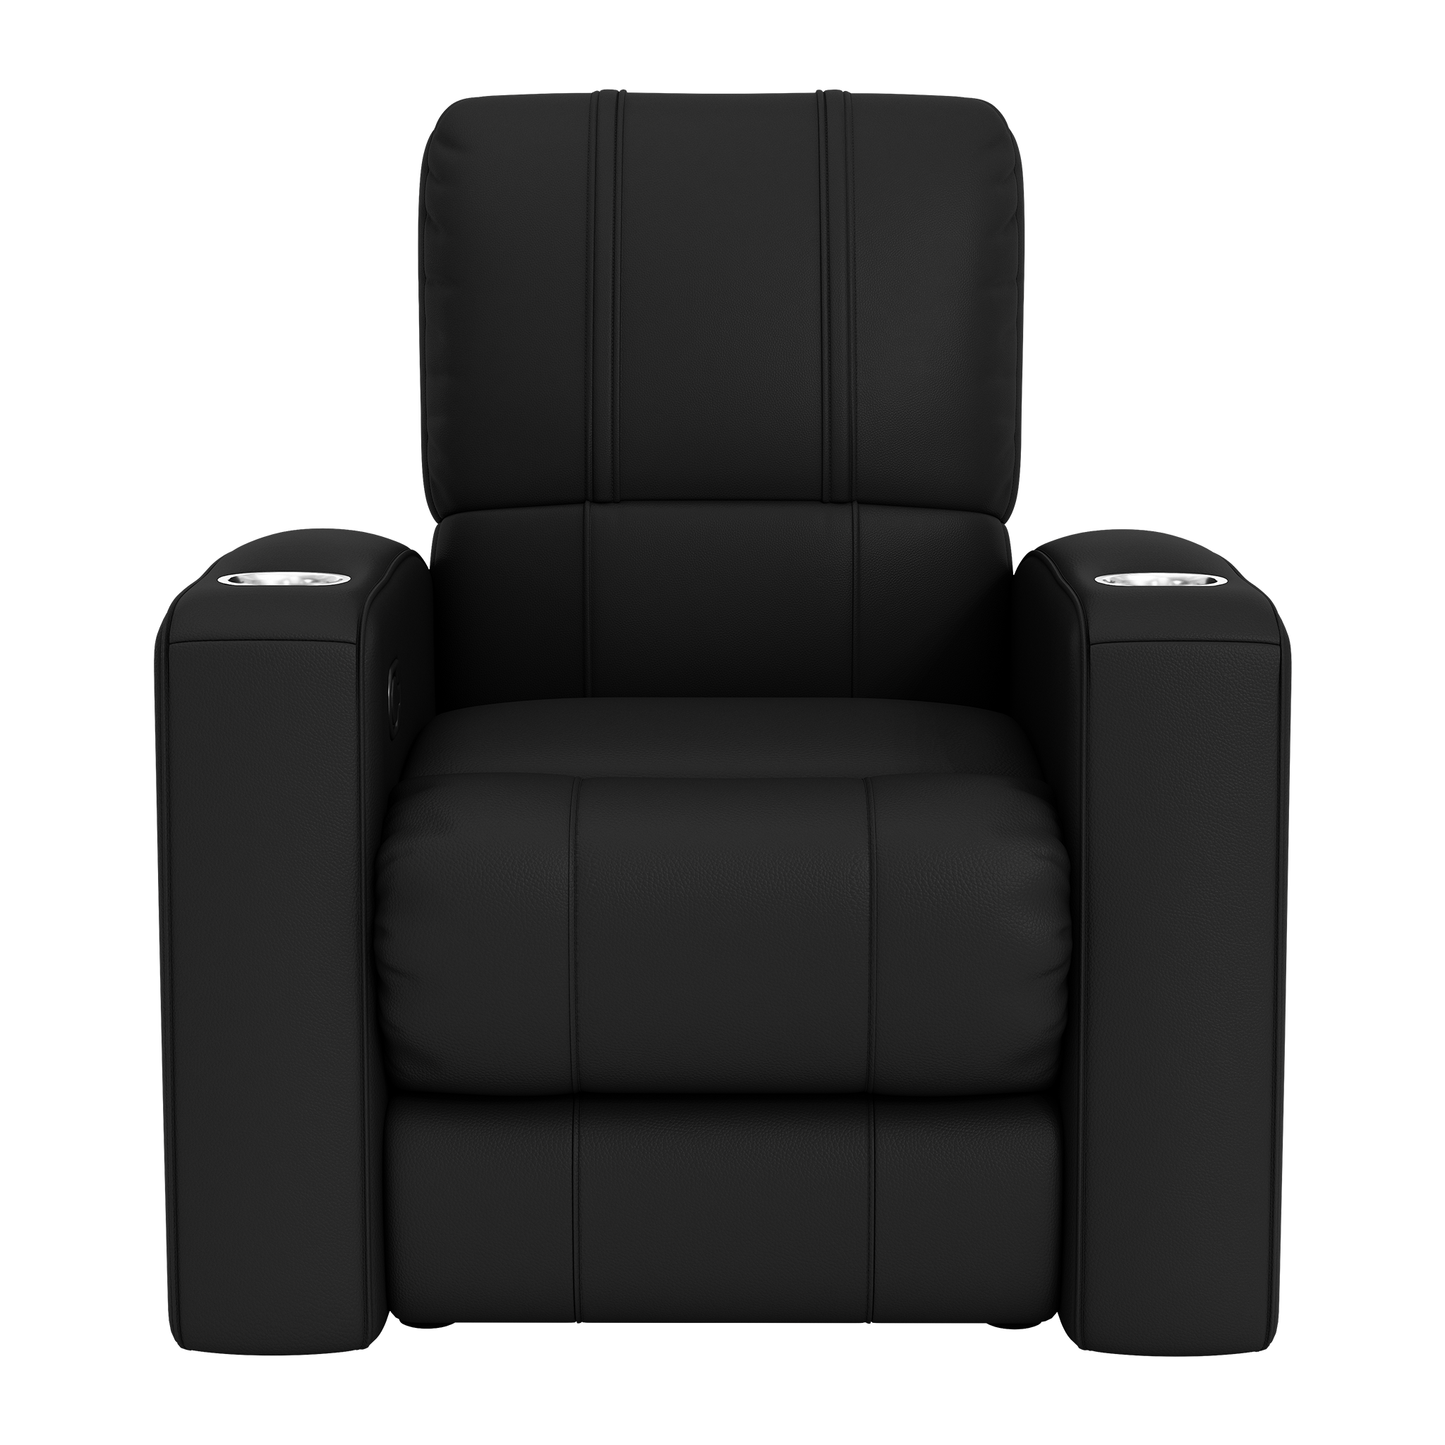 Relax Home Theater Recliner with  Minnesota Vikings Secondary Logo